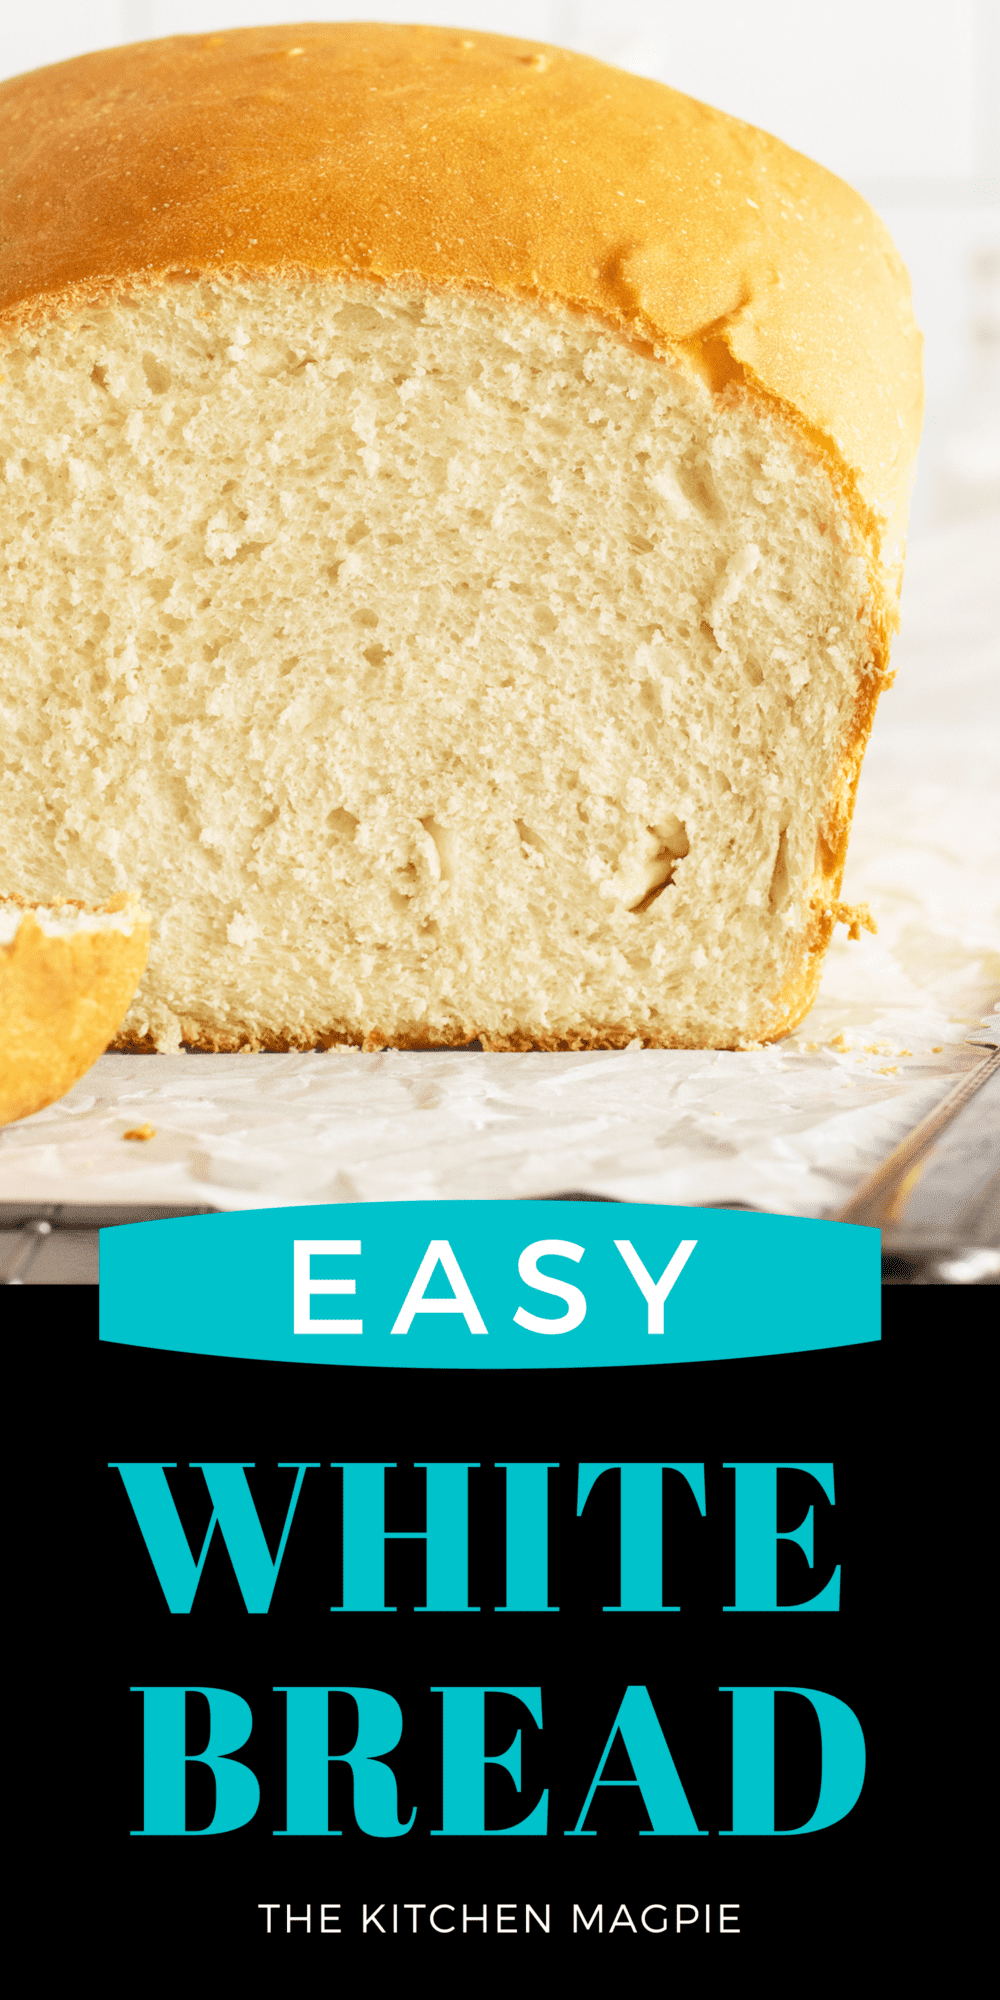 There is nothing more versatile and simple than some delicious white bread. Instead of buying it for a huge price at the supermarket, why not make it yourself?